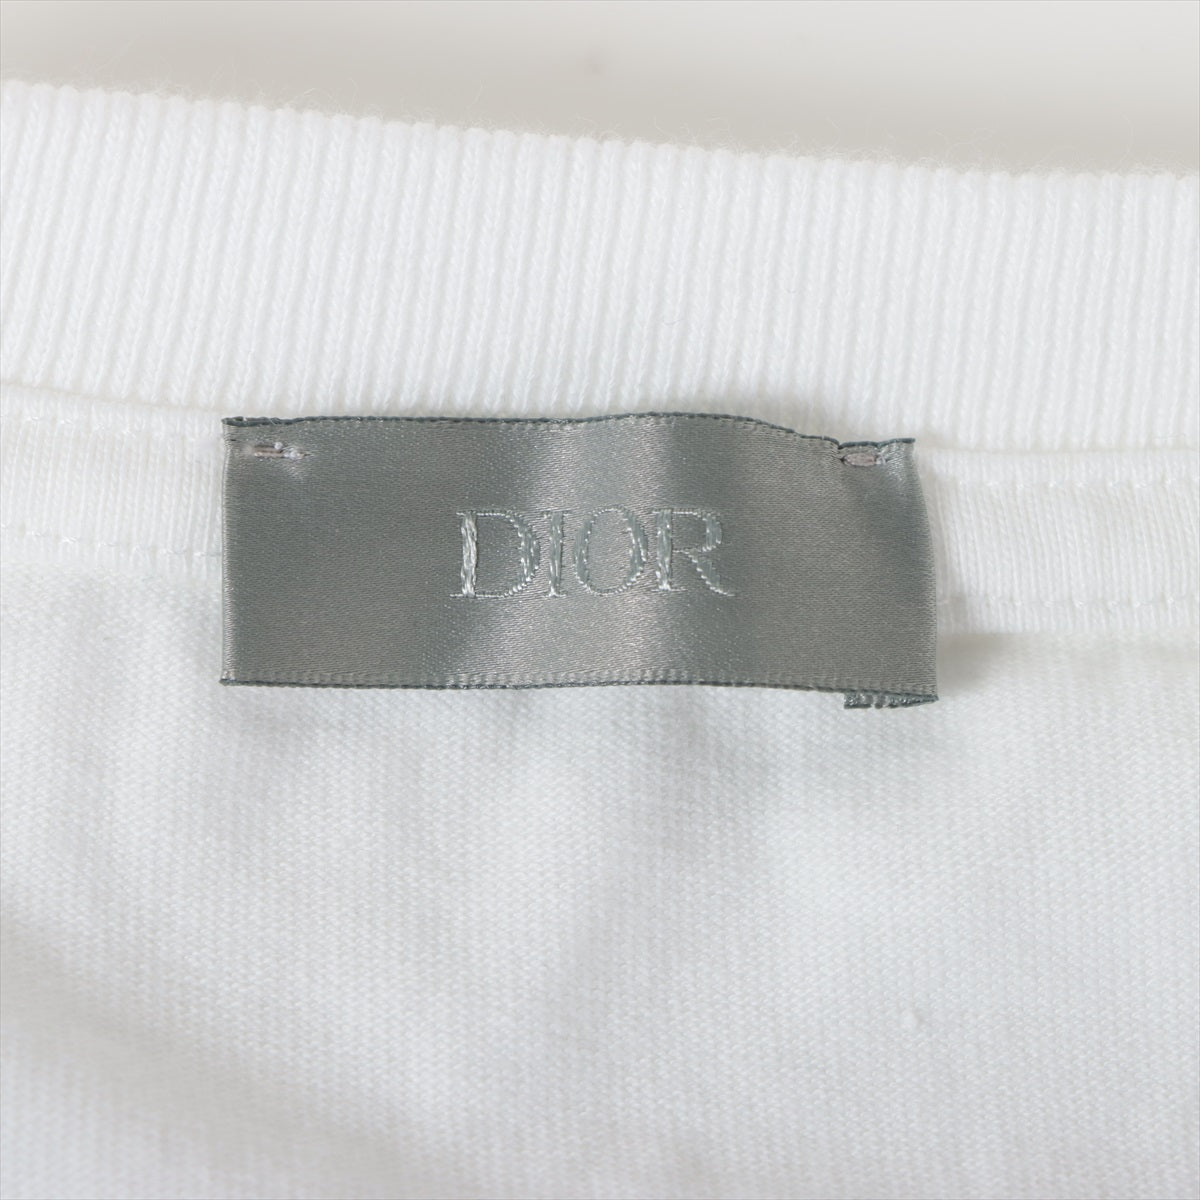 DIOR 23SS Cotton & polyester T-shirt S Men's White  313J696A0554 relaxed fit